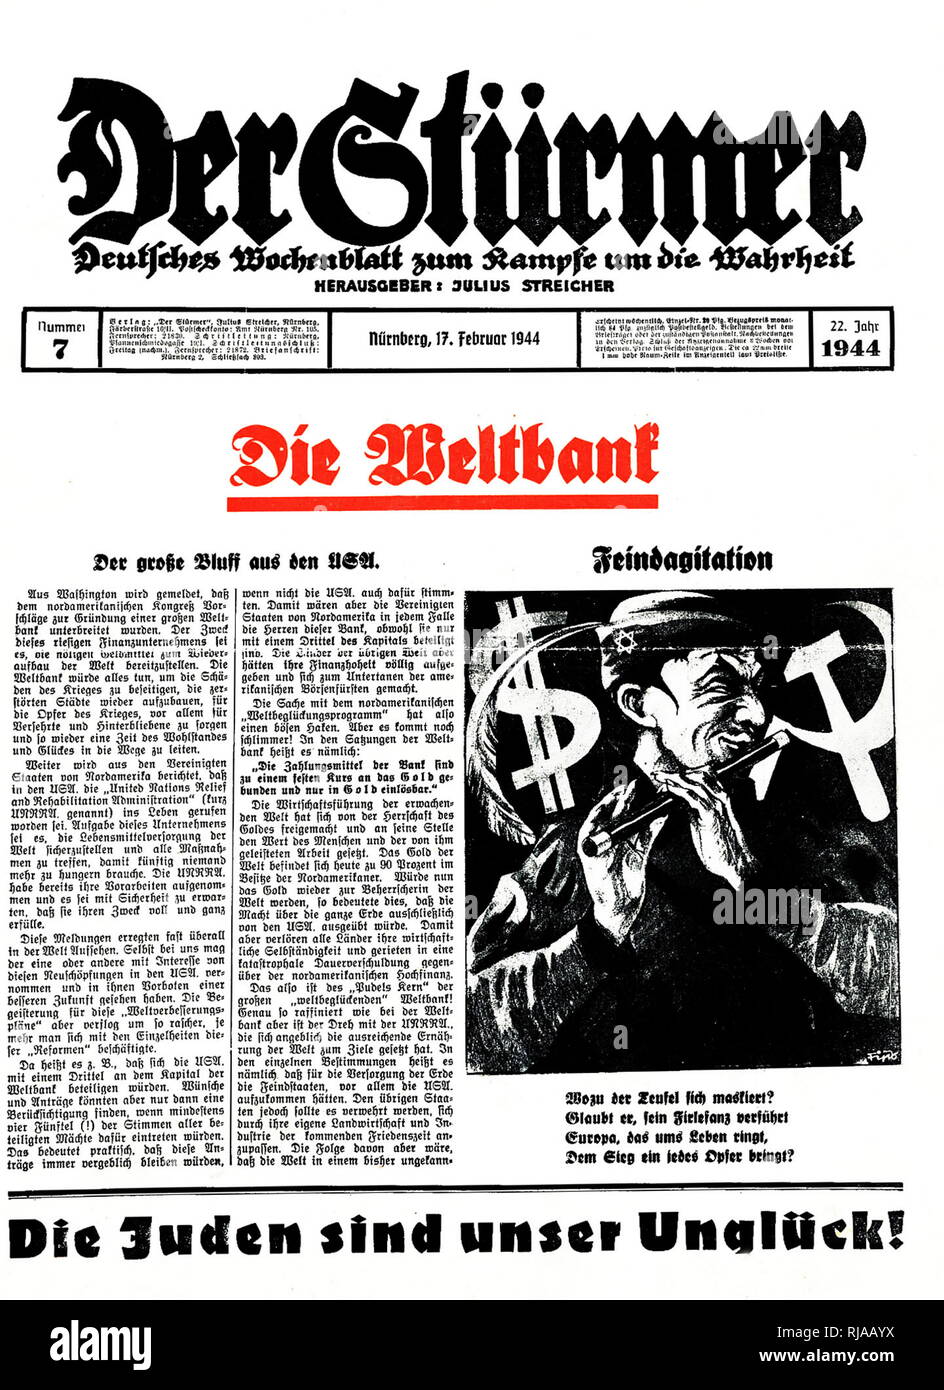 Der Stürmer, front page; 1944  accusing North American Jews of controlling the World Bank. Der Stürmer  was a weekly German tabloid-format newspaper published by Julius Streicher, the Gauleiter of Franconia, from 1923 to the end of World War II. It was a significant part of Nazi propaganda and was vehemently anti-Semitic. Stock Photo